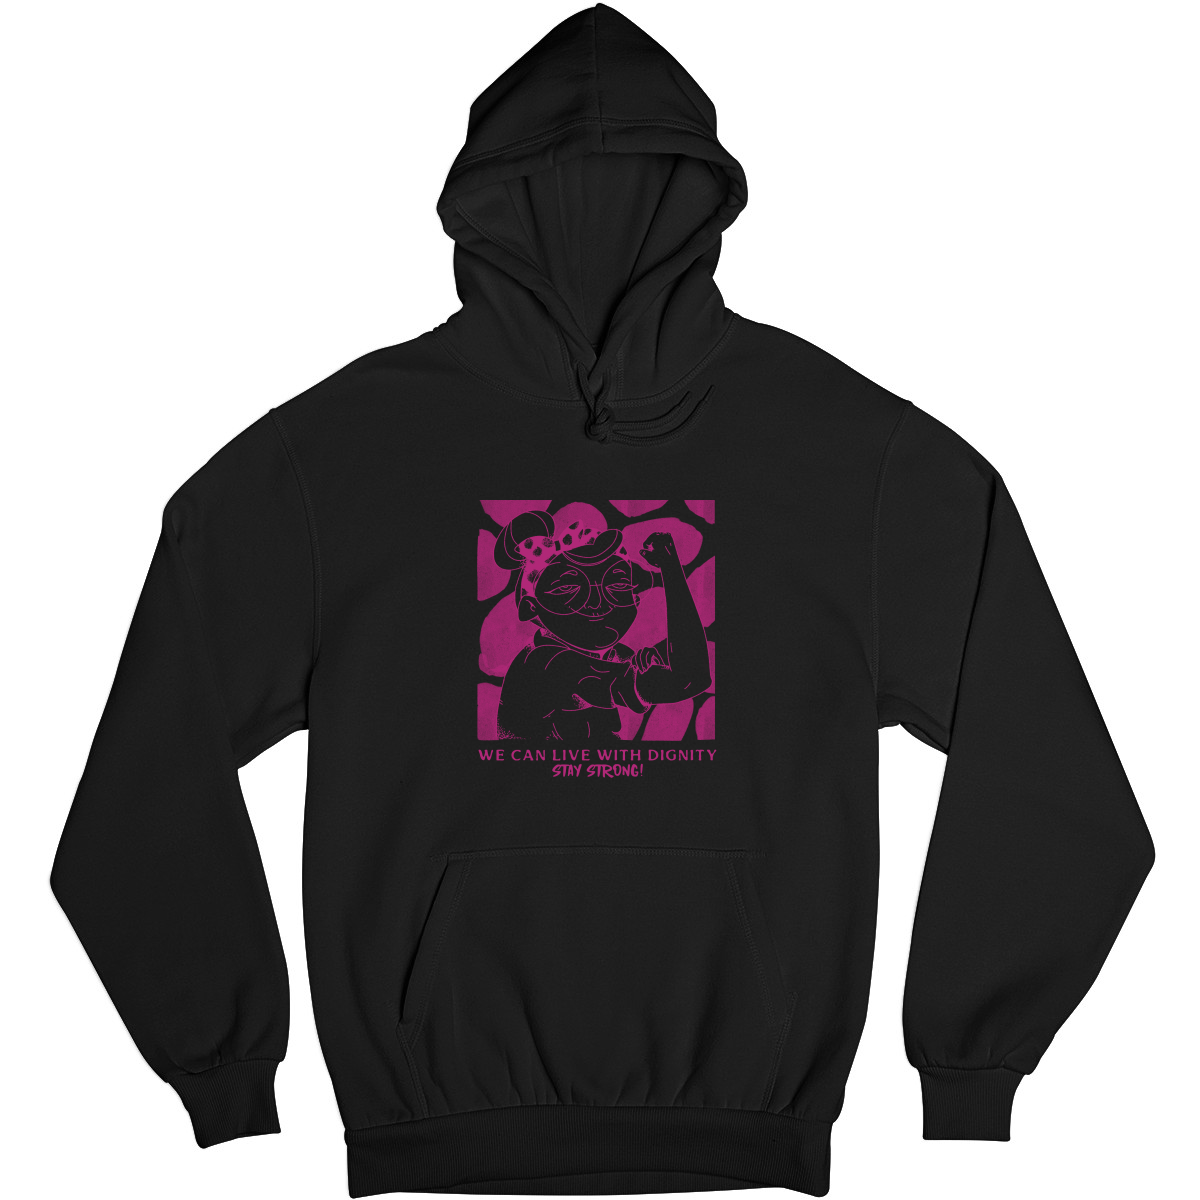 We can live with dignity STAY STRONG! Unisex Hoodie | Black